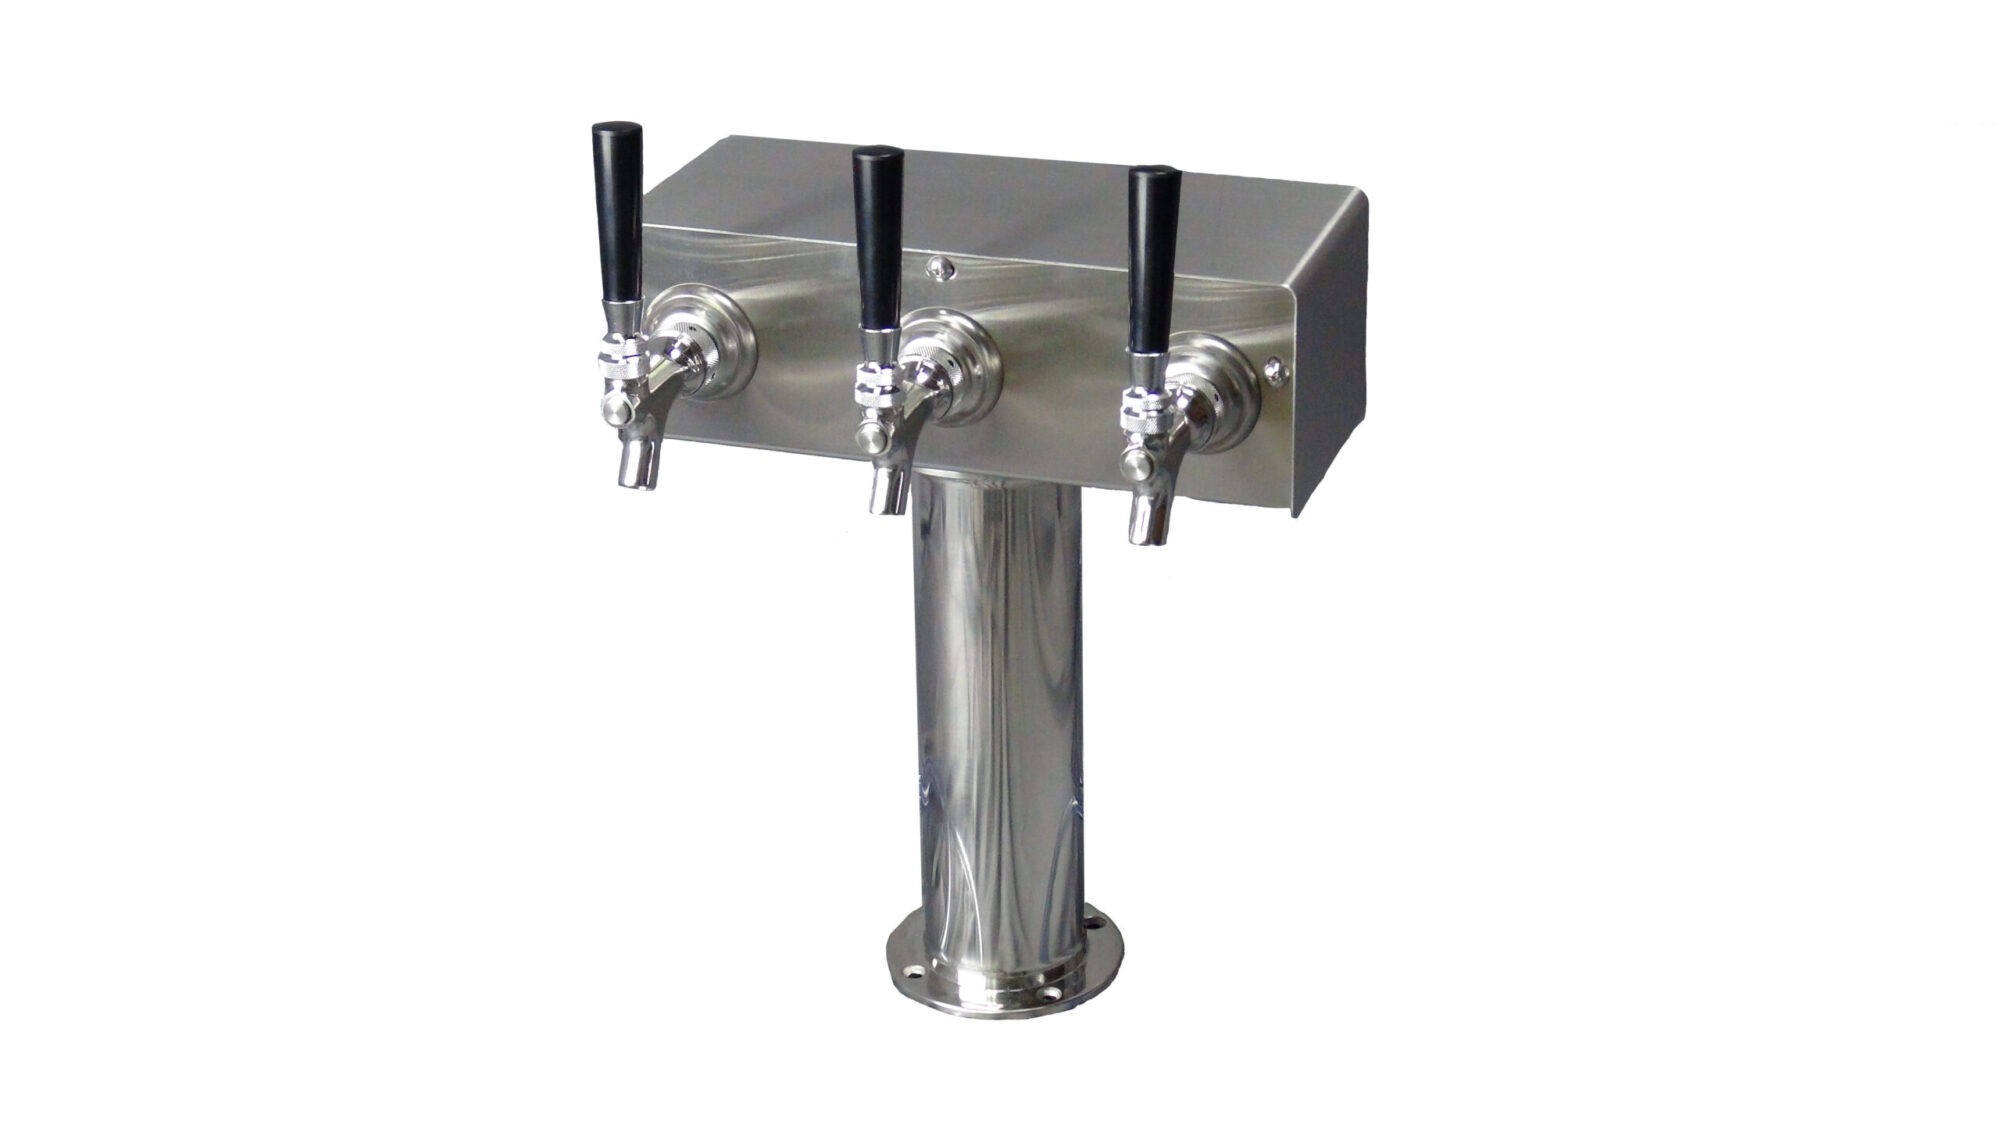 633RG-SS Three Faucet T Tower with 3" Round Base - Stainless Steel Faucets and Shanks - Glycol Ready